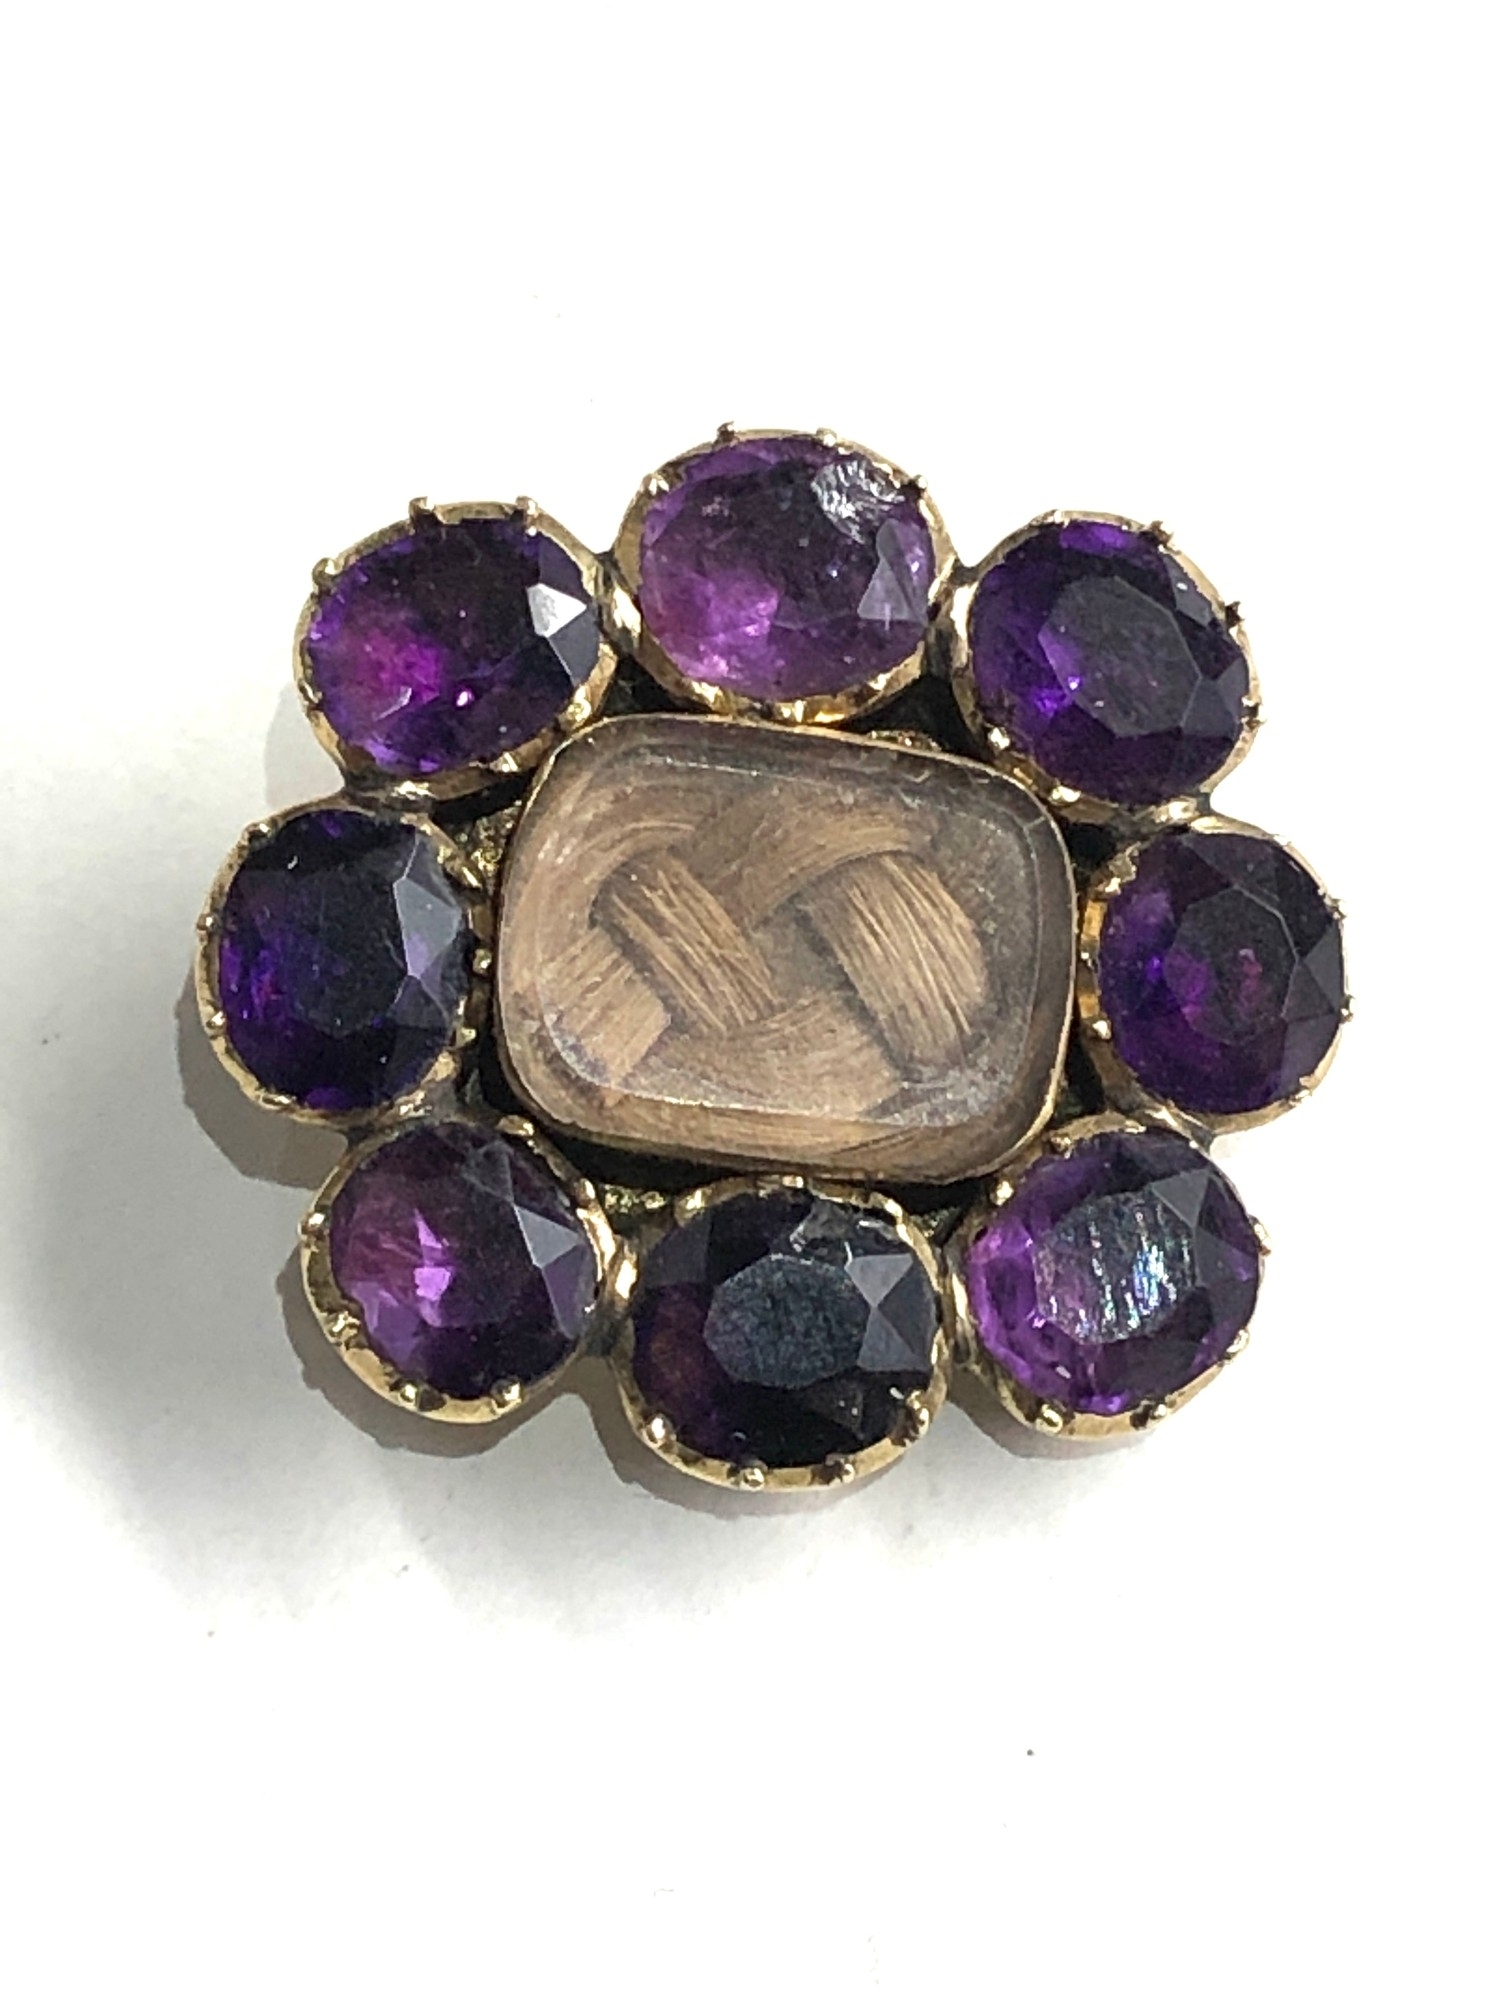 Antique georgian gold amethyst mourning brooch measures approx 2.4cm by 2.2cm weight 5g